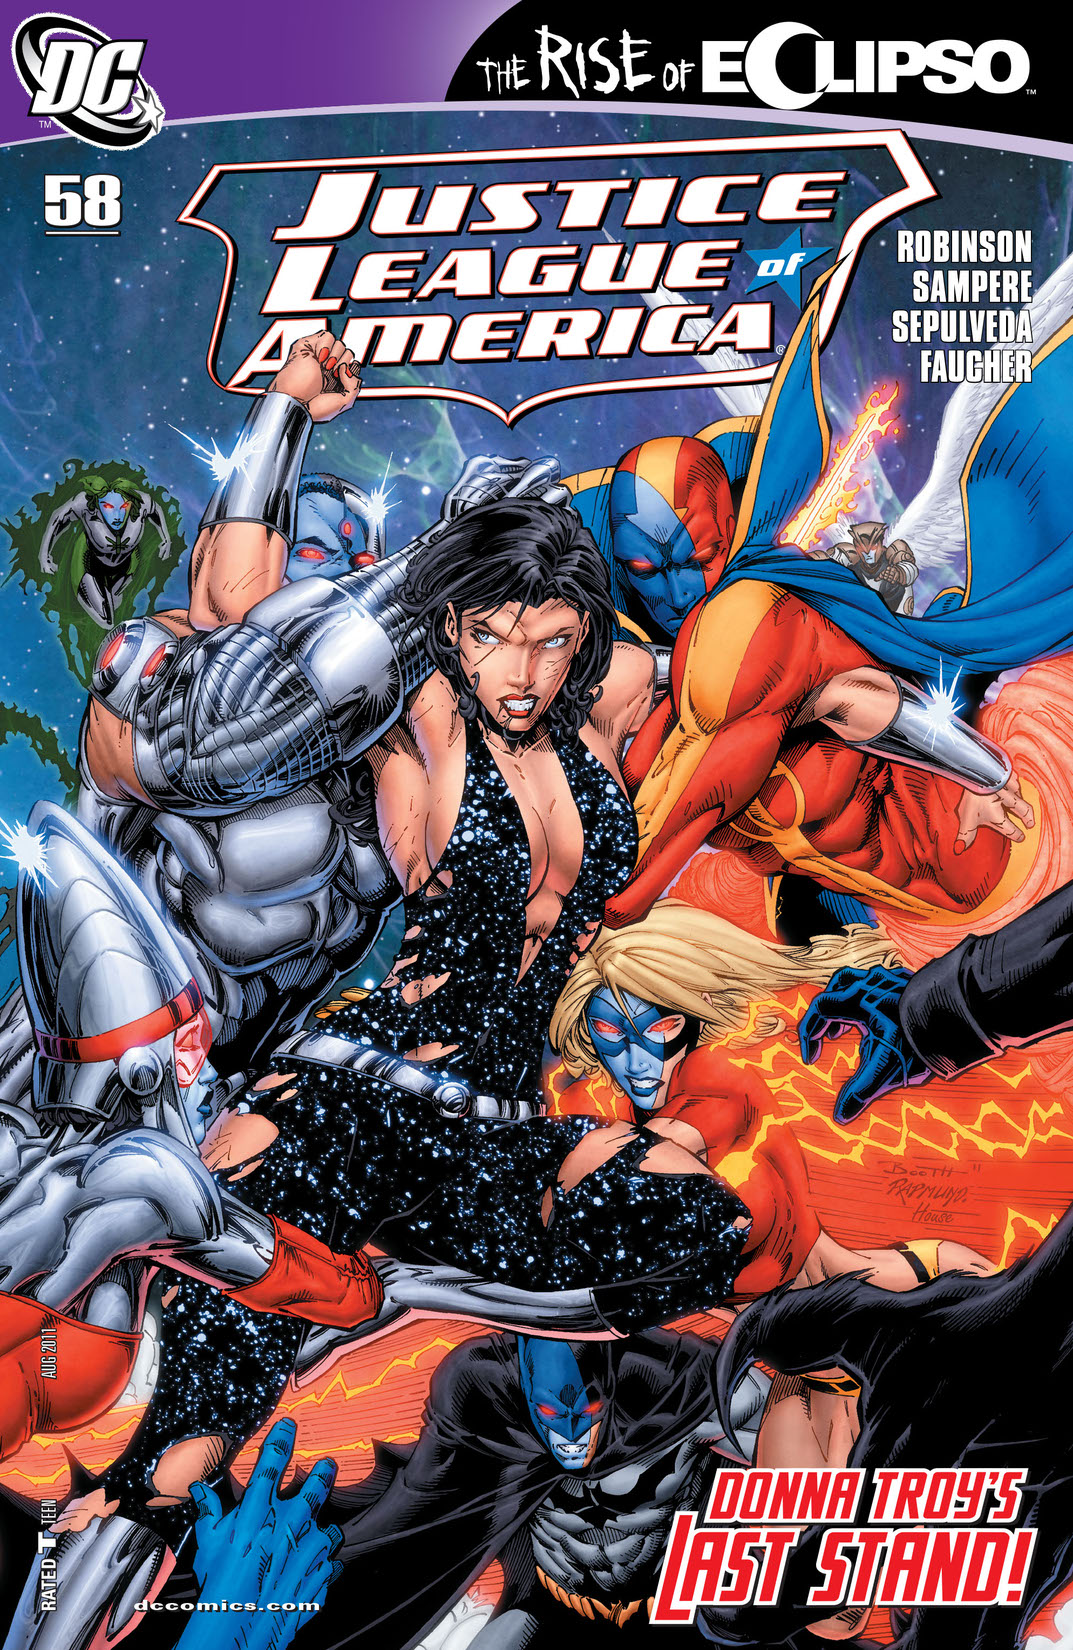 Justice League of America (2006-) #58 preview images